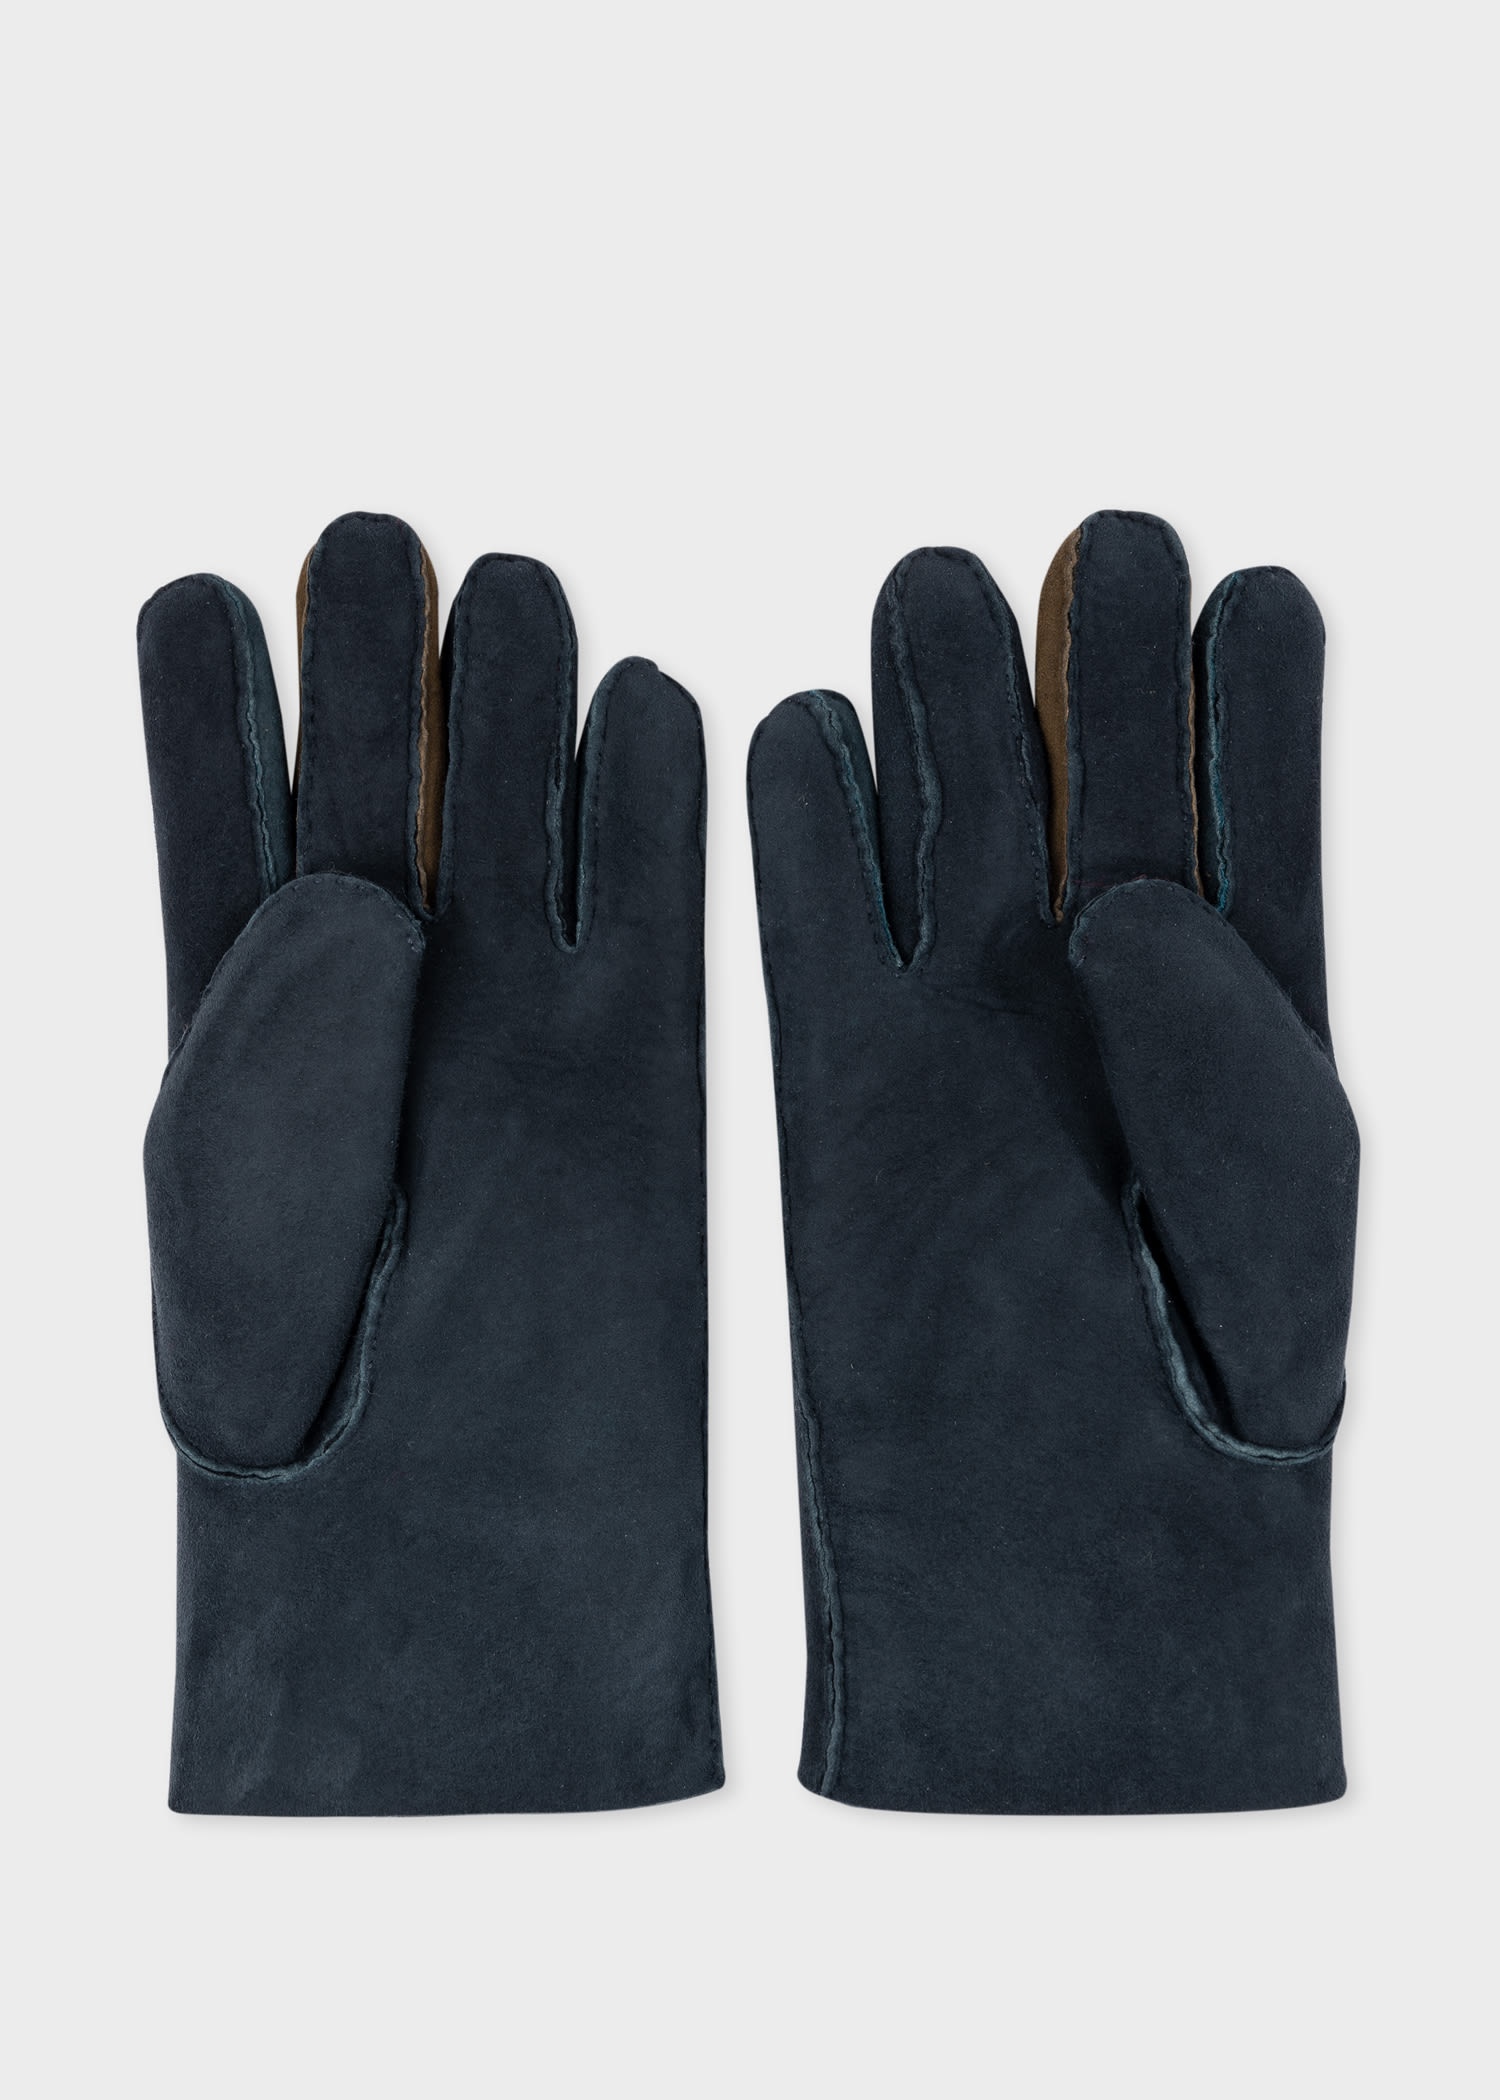 Shearling Gloves - 2